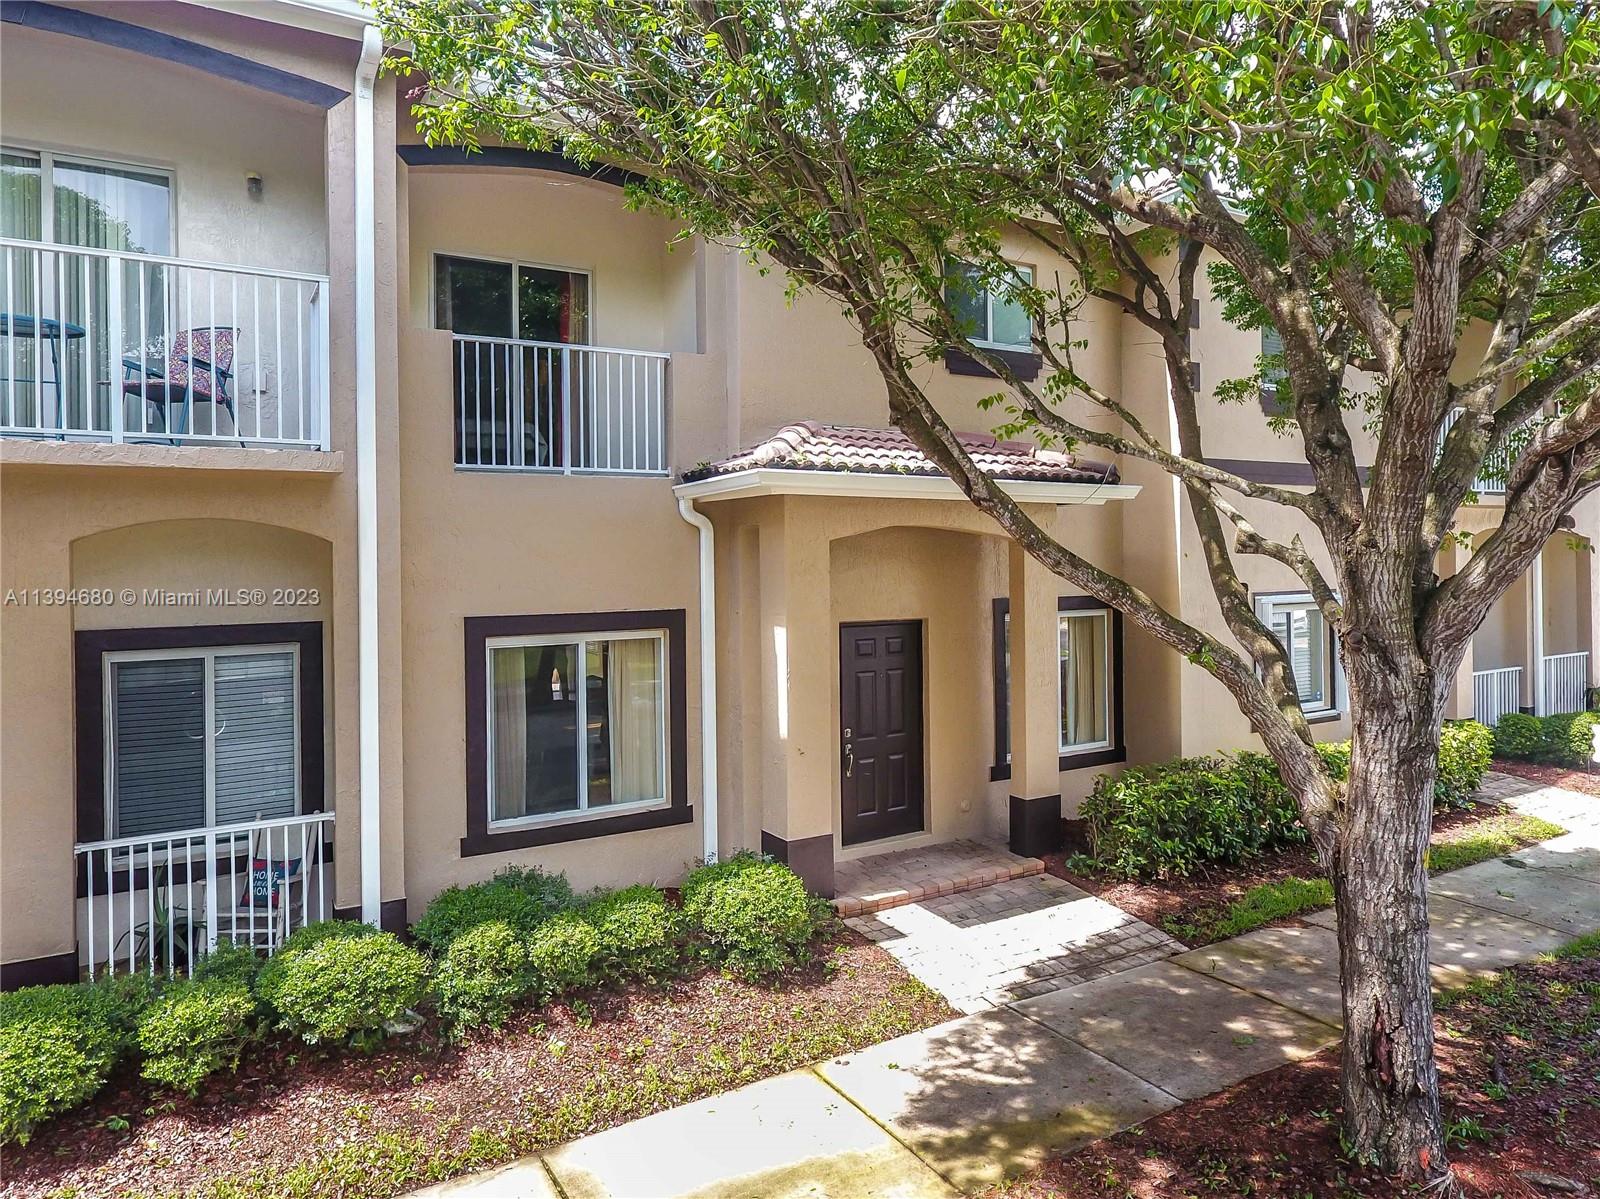 DESIRABLE 3 BR/2.5 BA TOWNHOME W/ GARAGE IN GATED COMMUNITY OF KEYS GATE. THIS SPACIOUS TOWNHOME OFFERS ALMOST 2000 SQ FT LIVING AREA, LARGE OPEN KITCHEN W/ WOOD CABINETS, COOKING ISLAND & OVERSIZED PANTRY. THE MASTER SUITE OFFERS A BALCONY, LARGE BATHROOM AND WALK-IN CLOSET. IMPACT WINDOWS ON 2ND FLOOR AS WELL AS LAUNDRY ROOM. BRAND NEW A/C JUST INSTALLED.